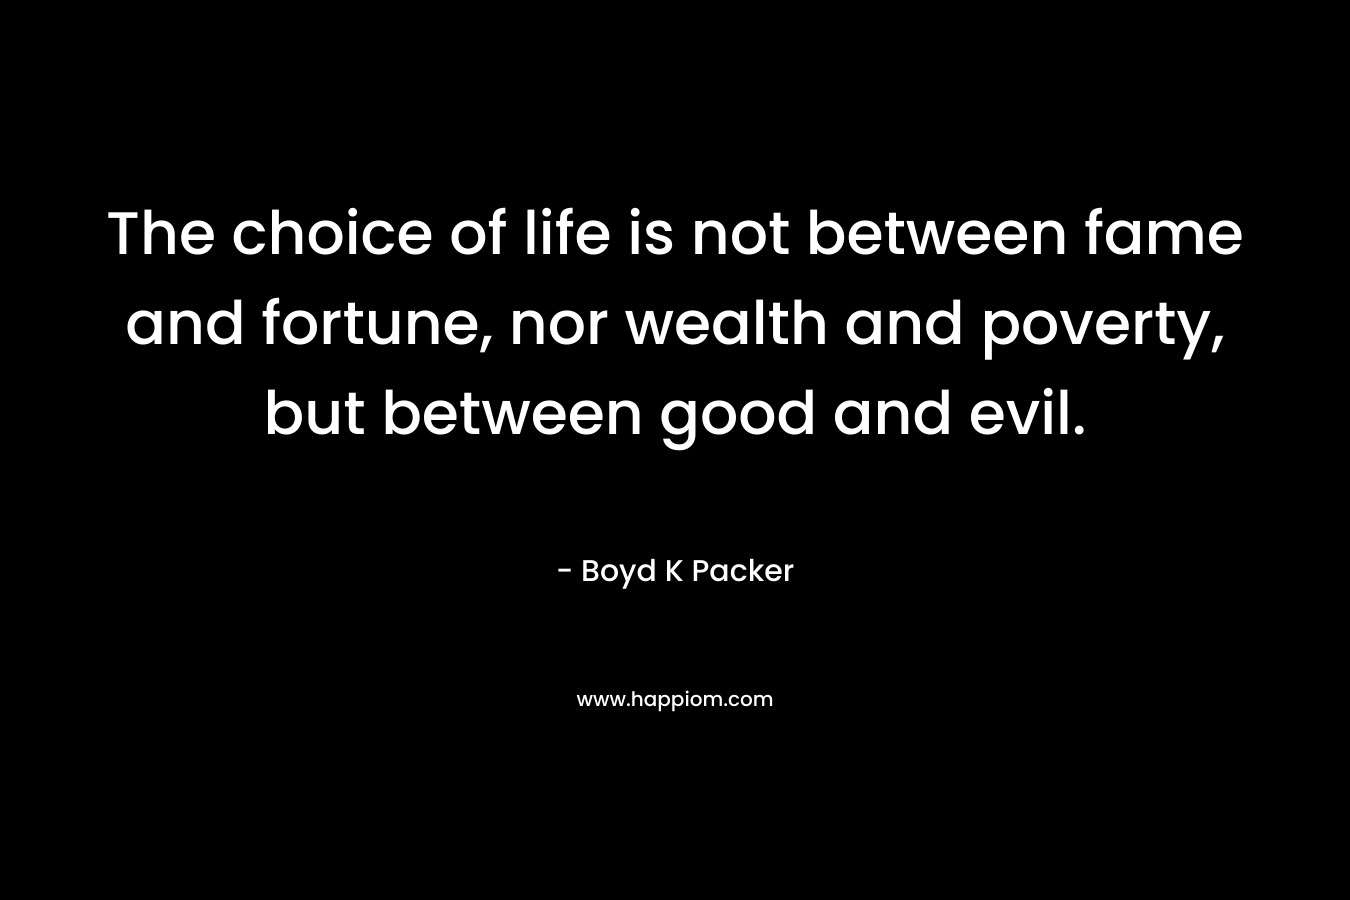 The choice of life is not between fame and fortune, nor wealth and poverty, but between good and evil. – Boyd K Packer